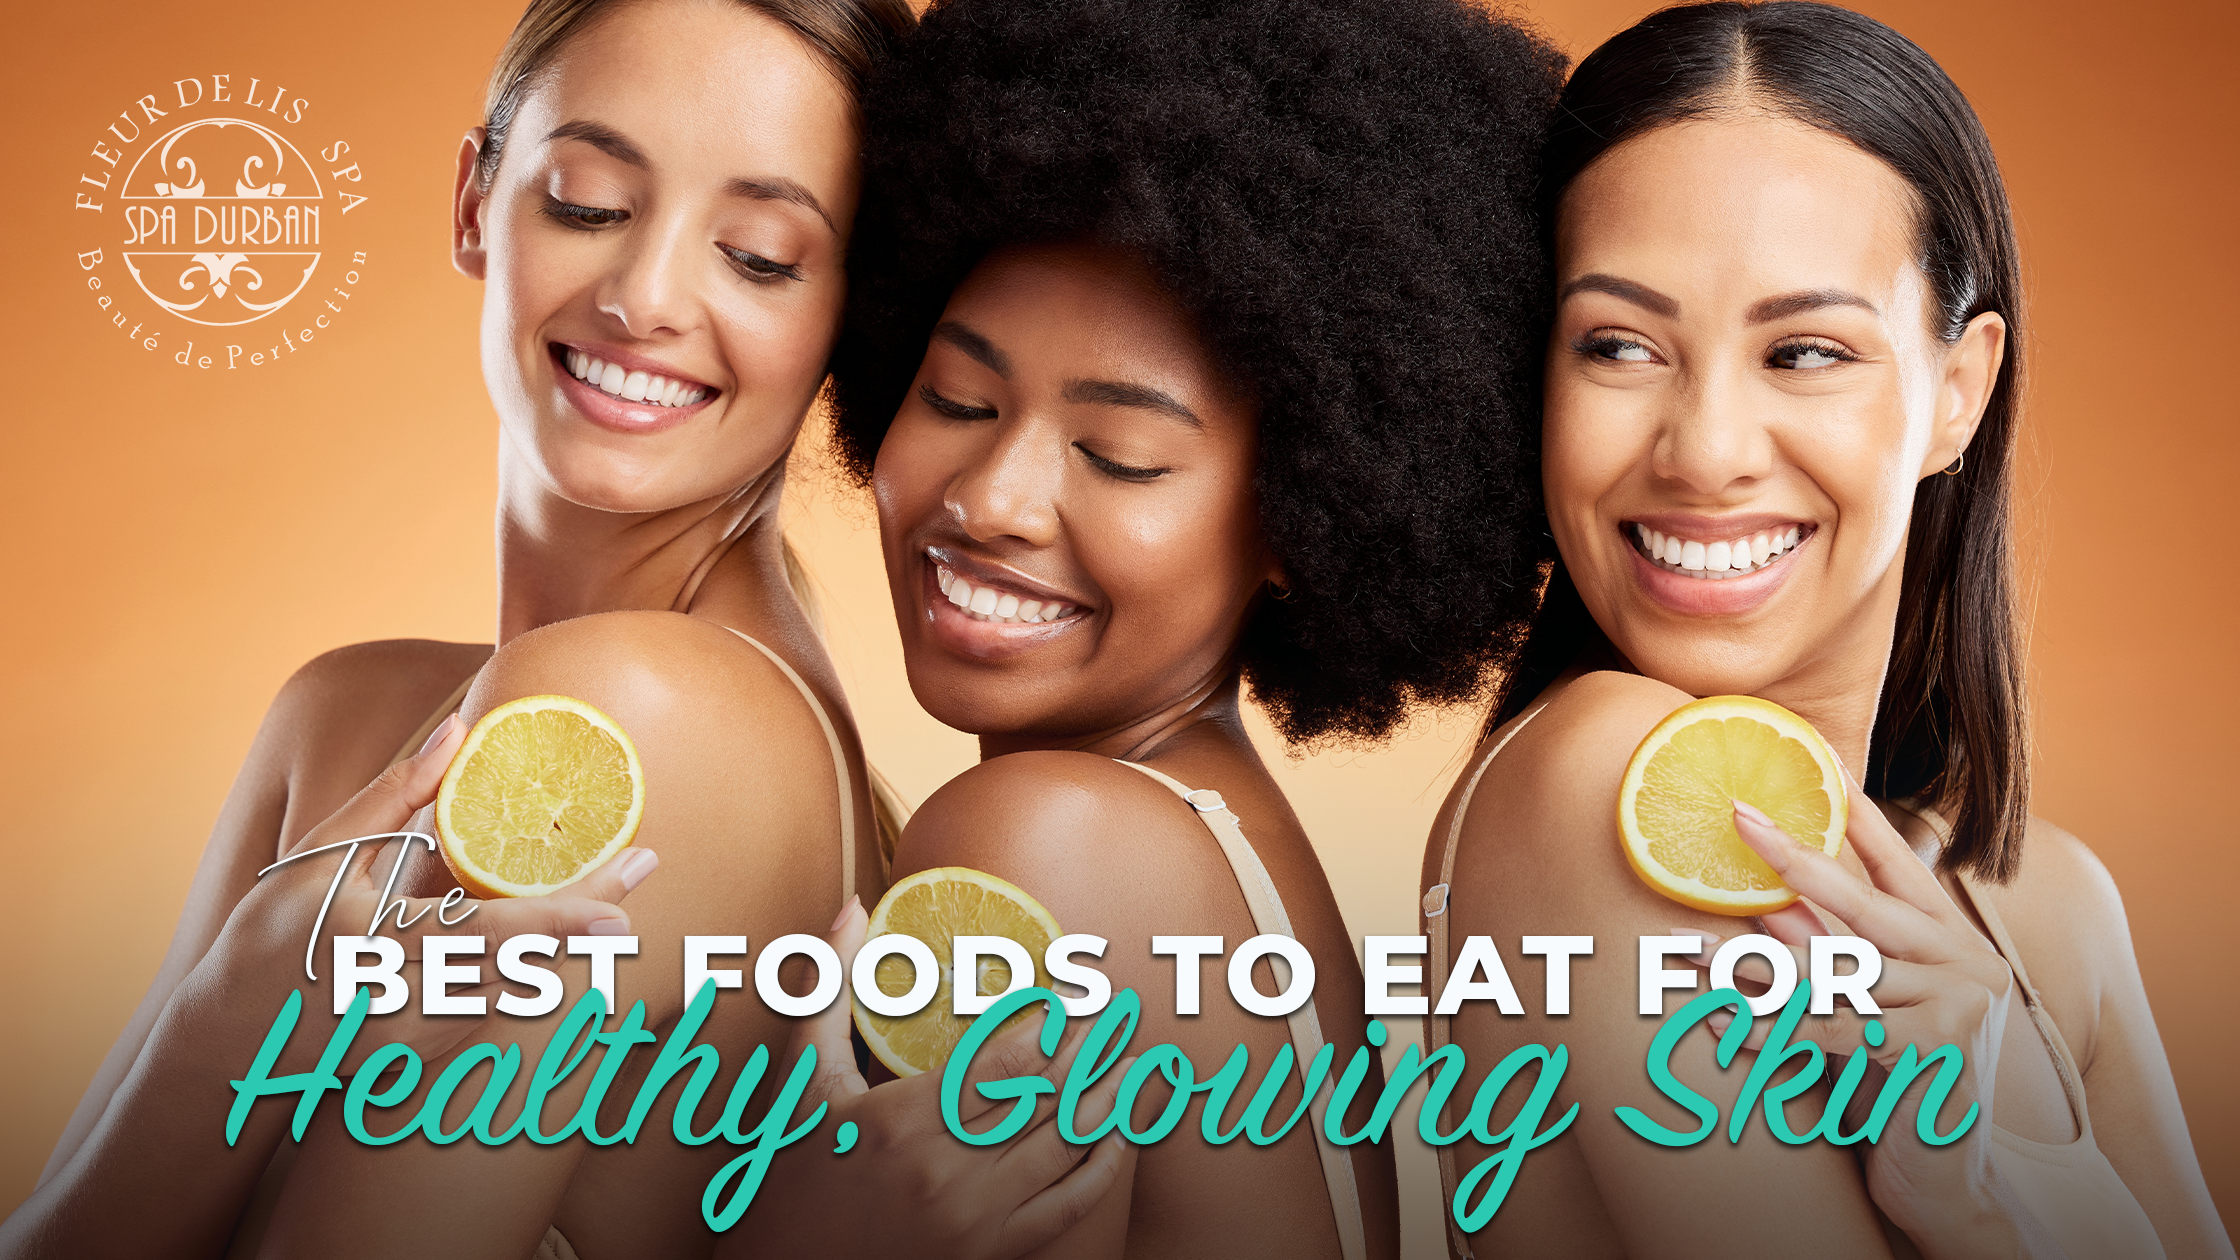 The Best Foods to Eat for Healthy, Glowing Skin